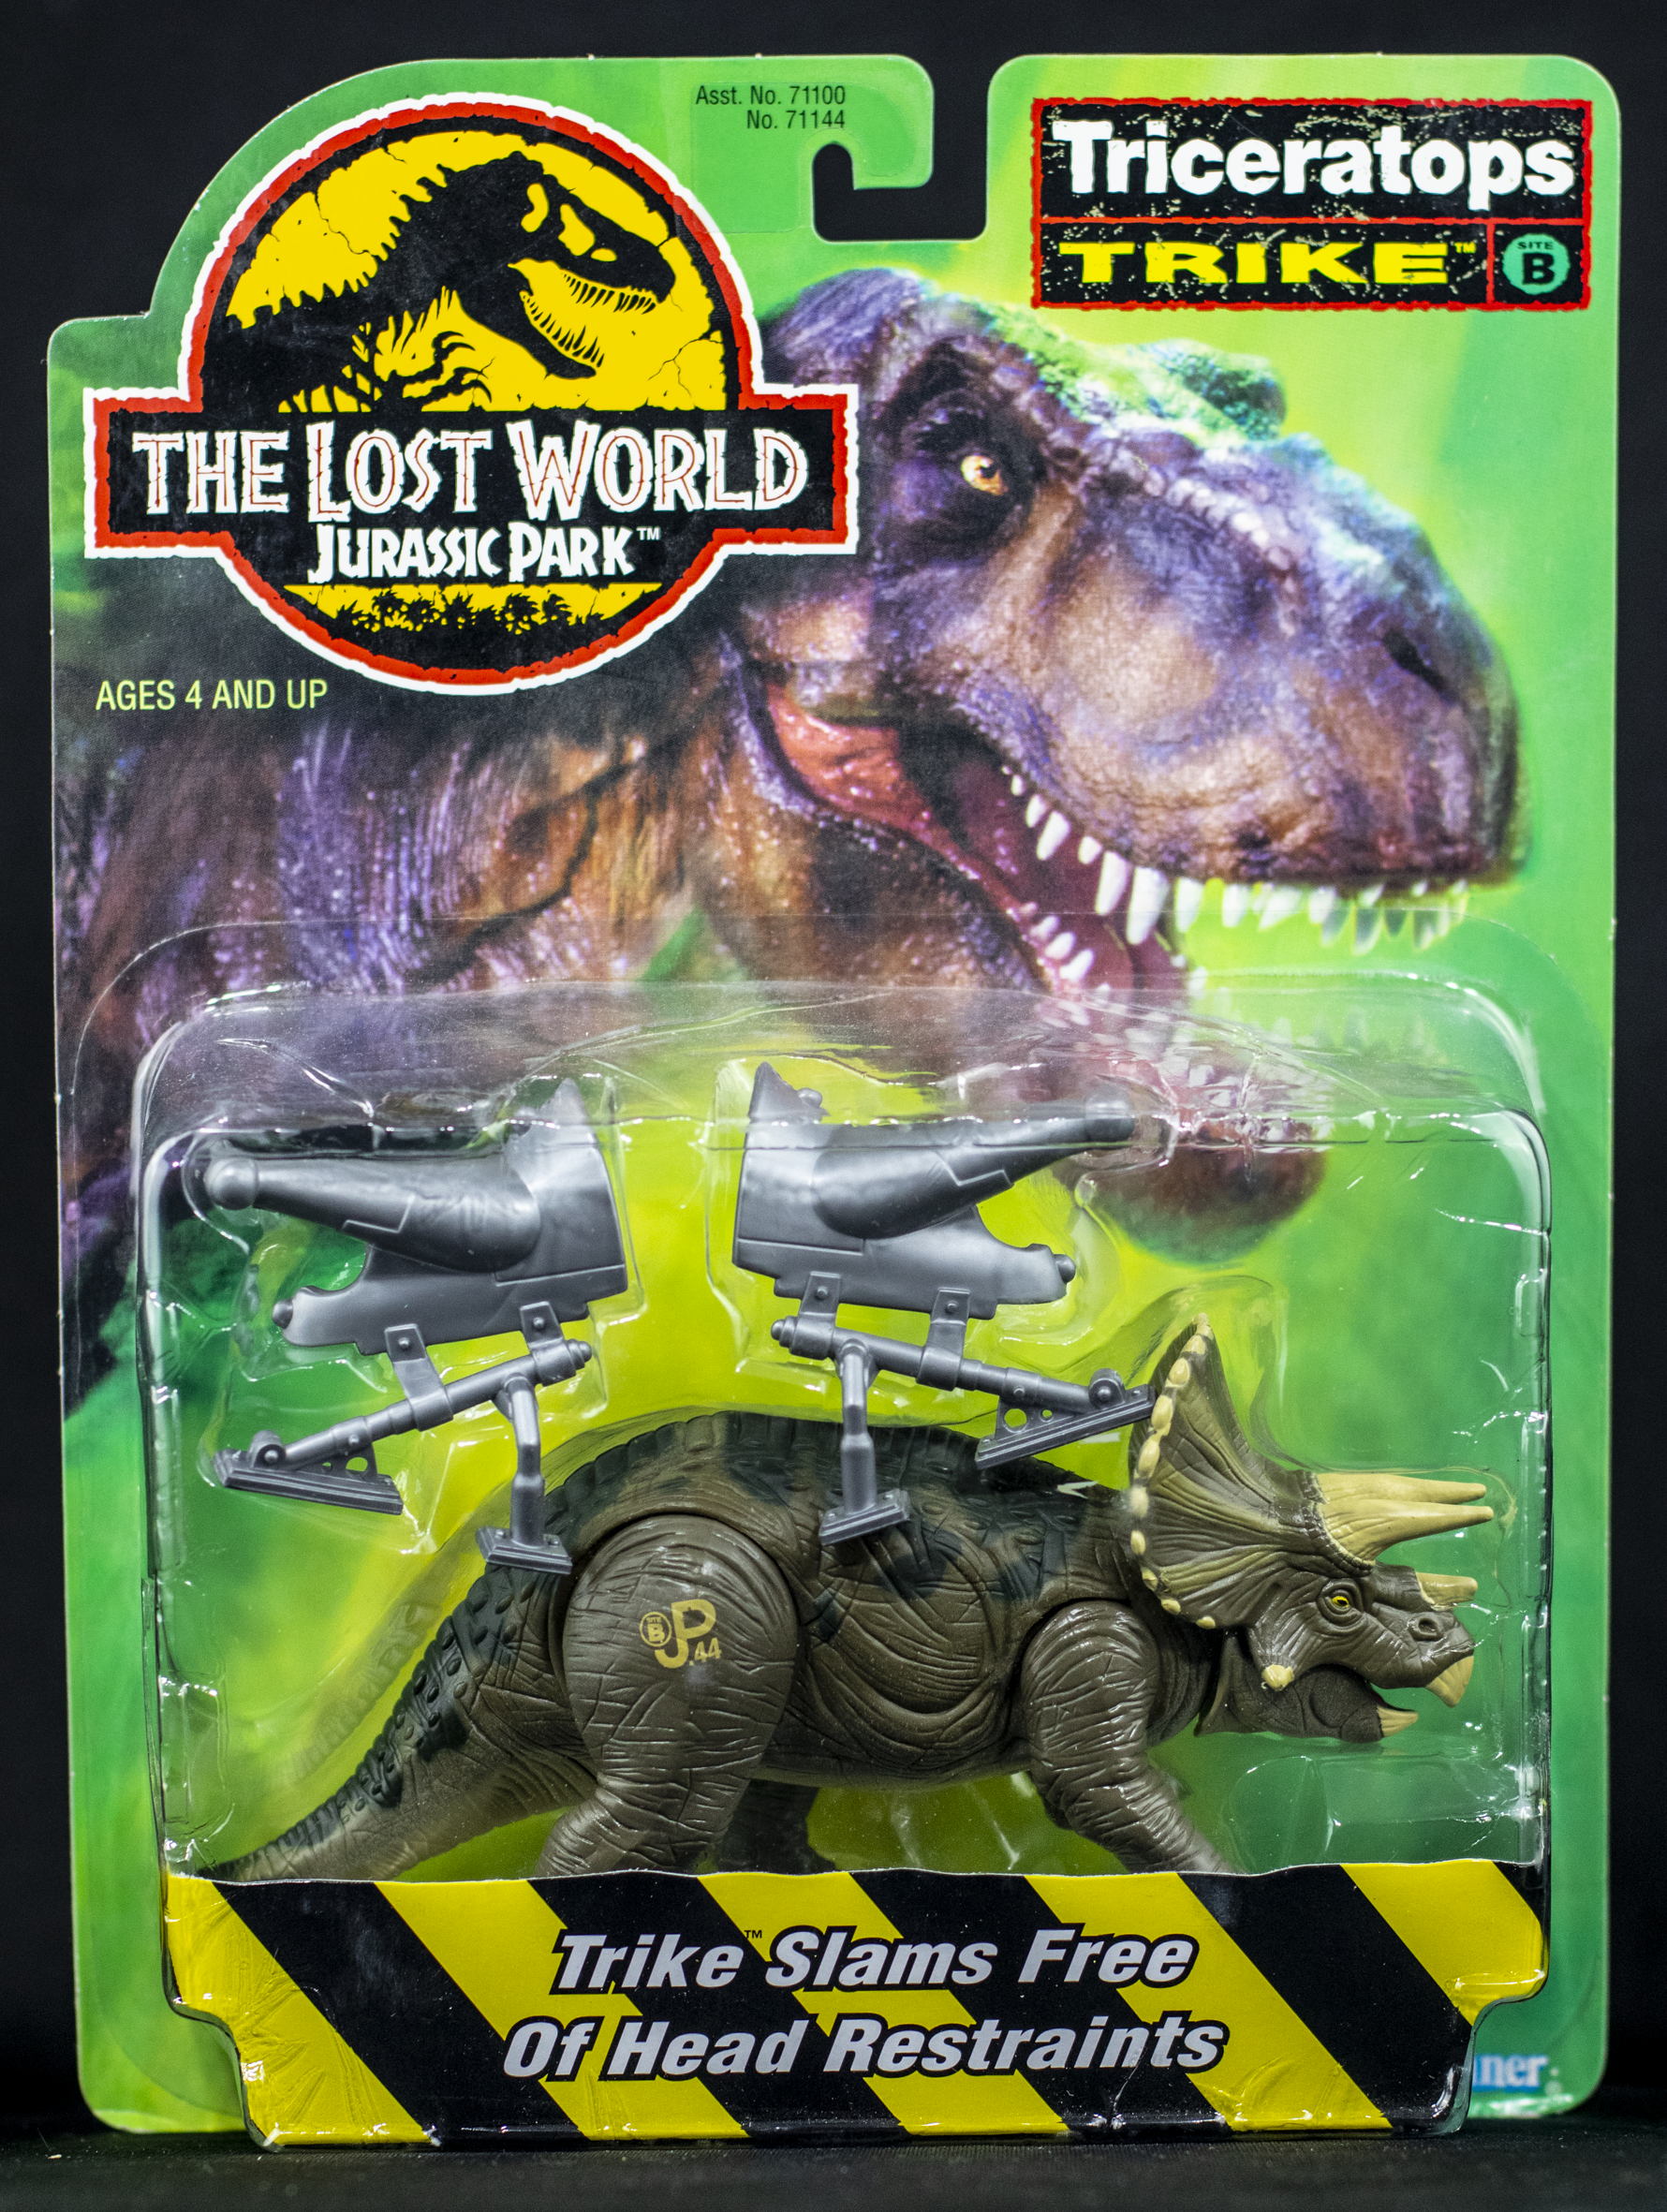 Jurassic Park: The Lost World Triceratops "Trike"